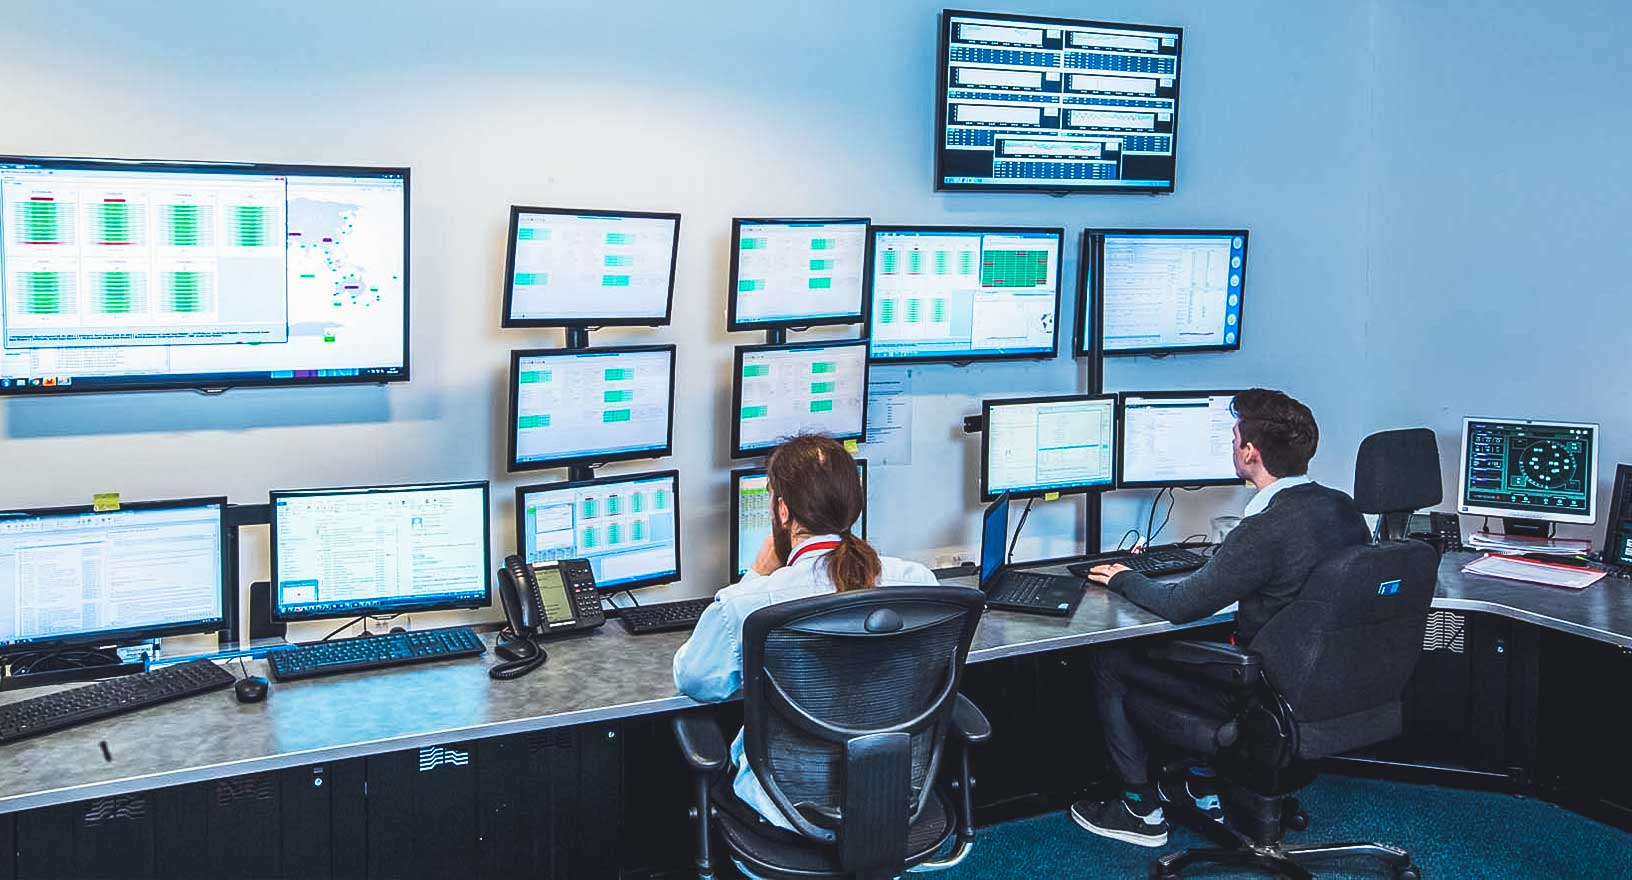 Our 24/7 support team are pictured working at one of our global network control centres.